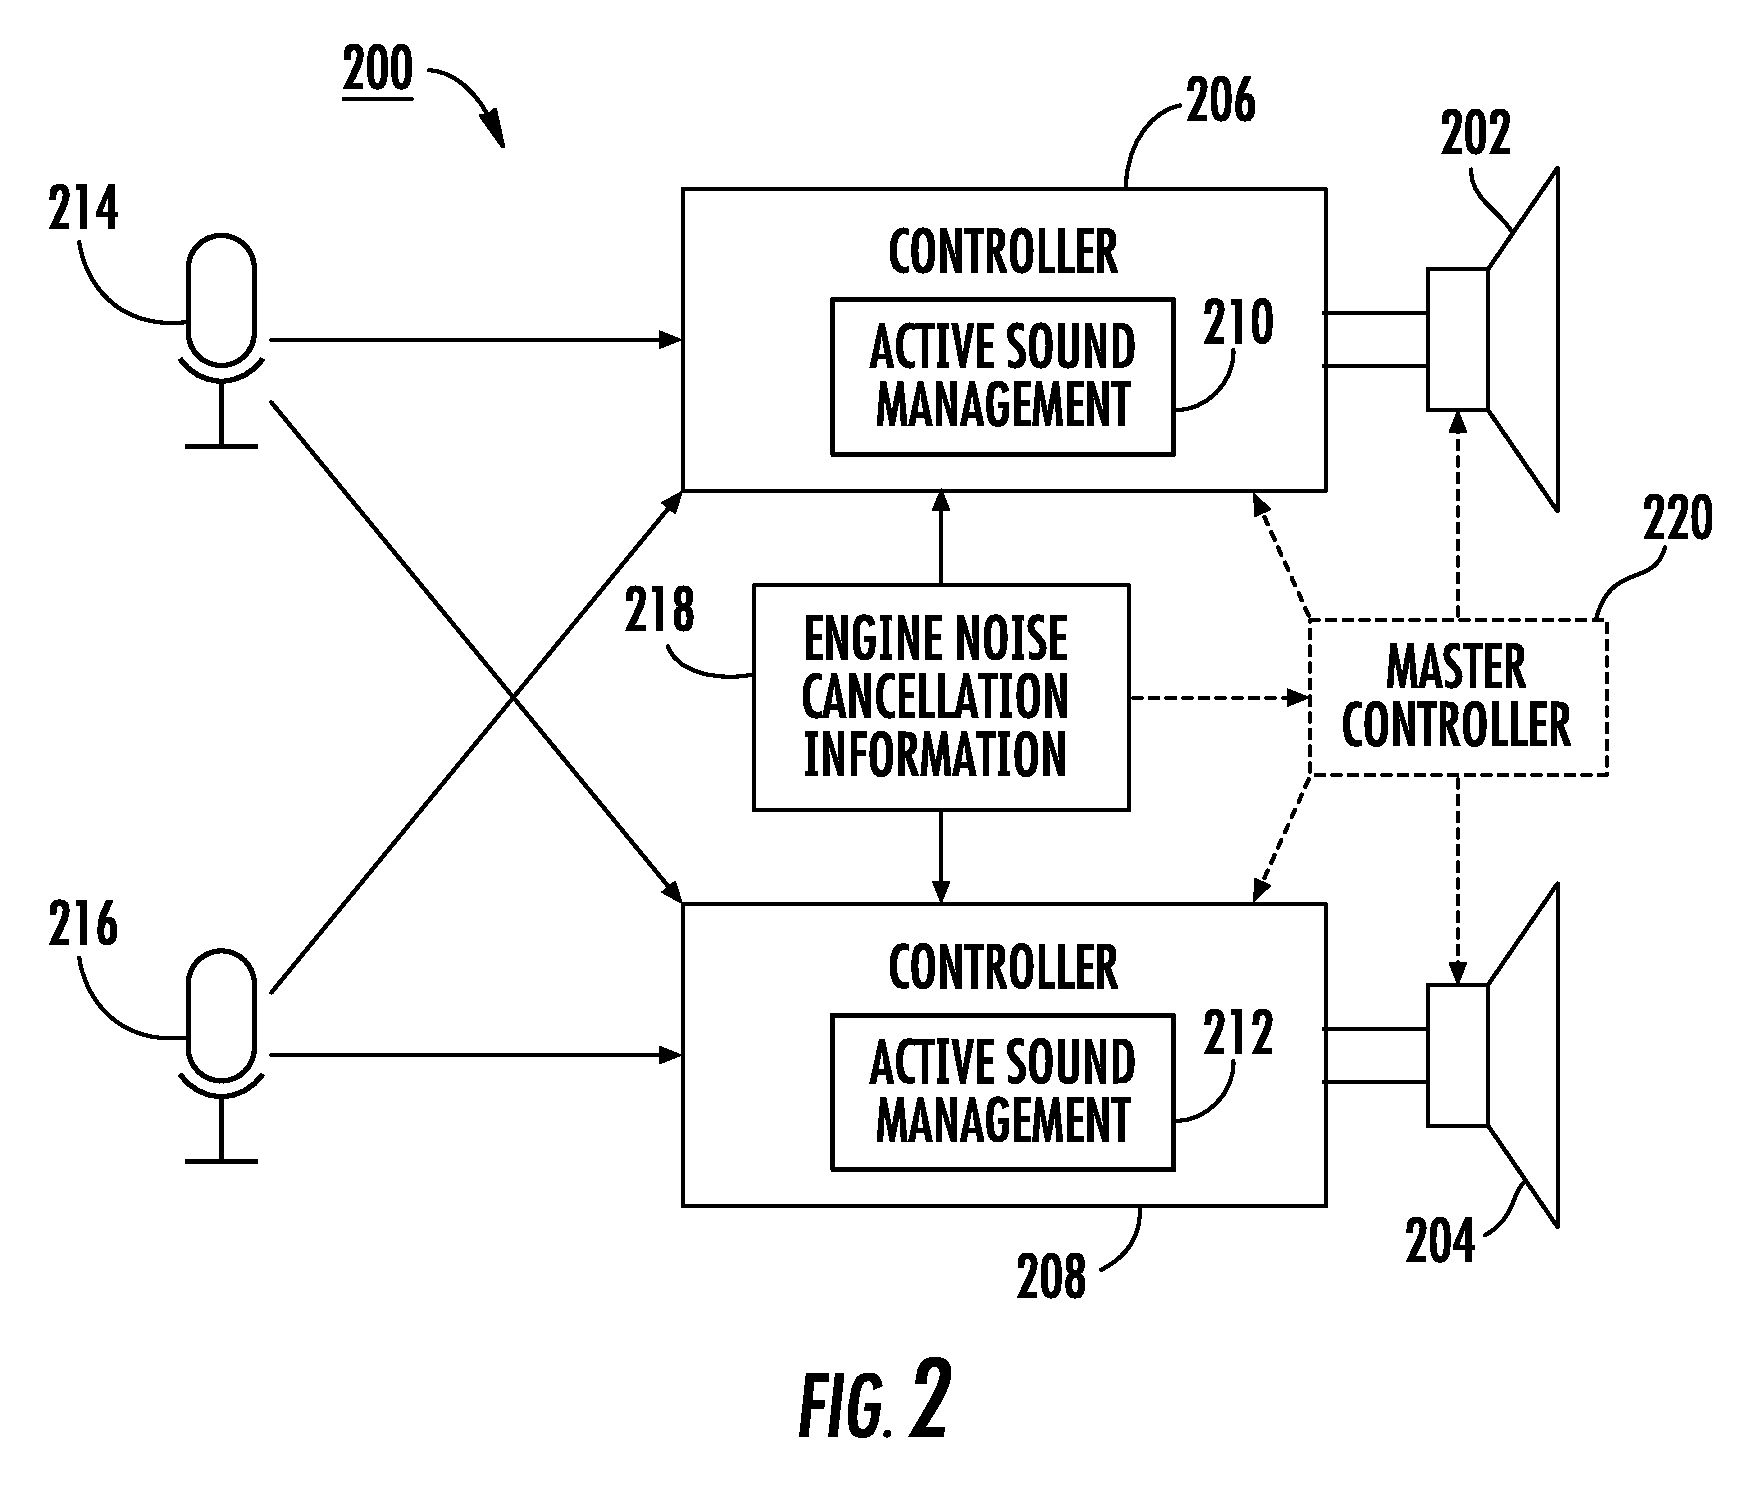 Forward speaker noise cancellation in a vehicle